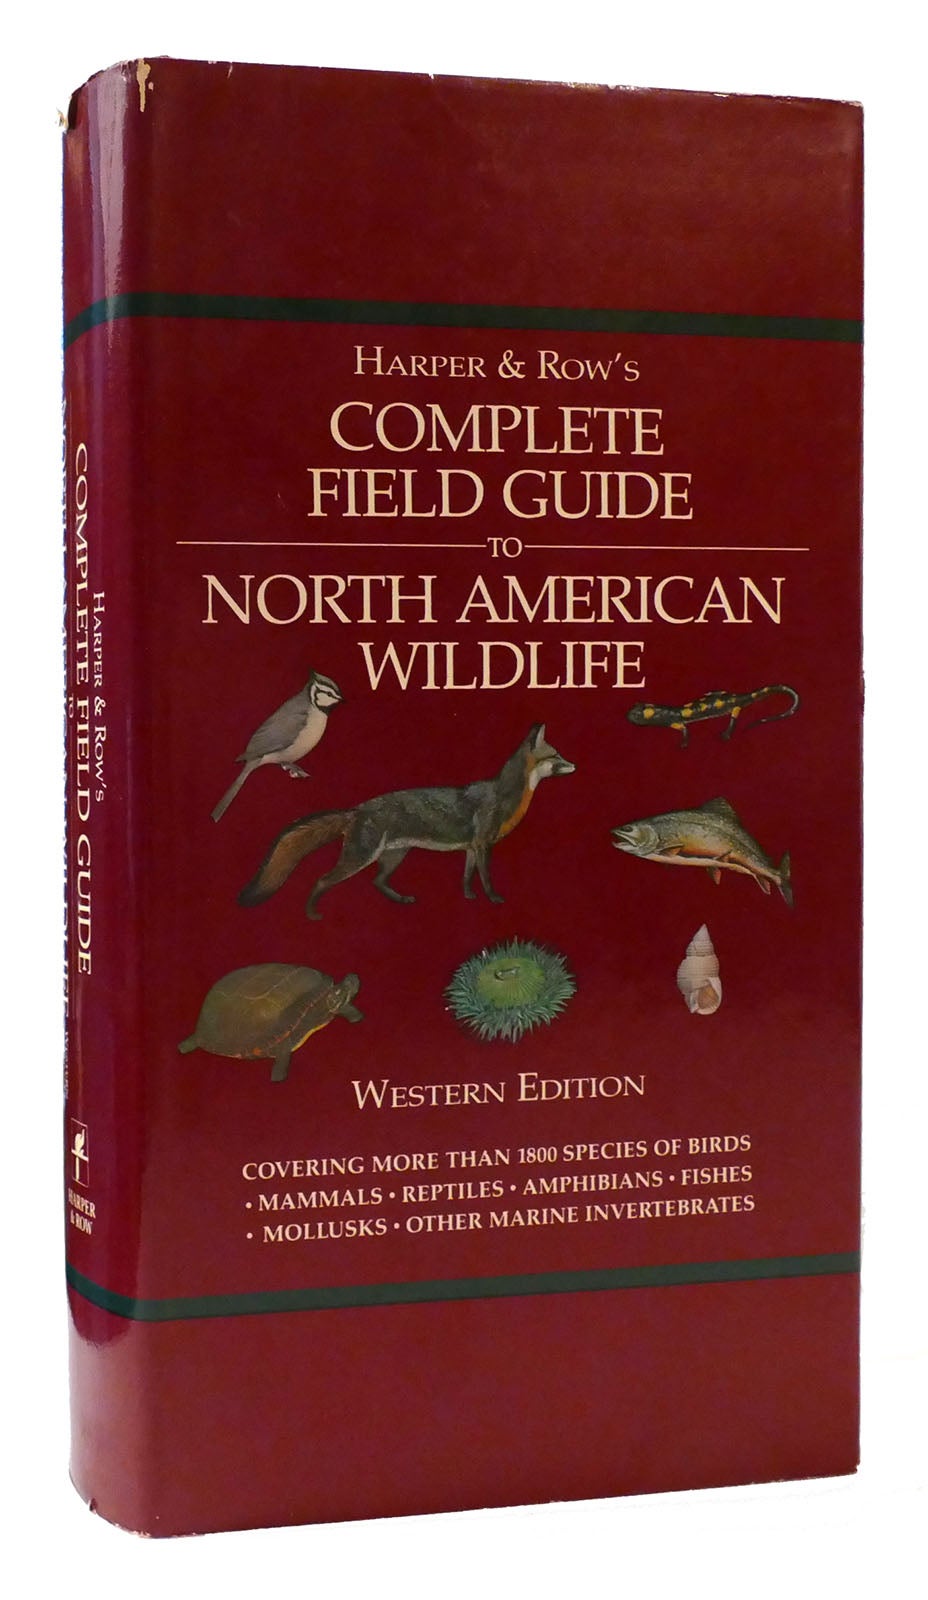 COMPLETE FIELD GUIDE TO NORTH AMERICAN WILDLIFE Western Edition